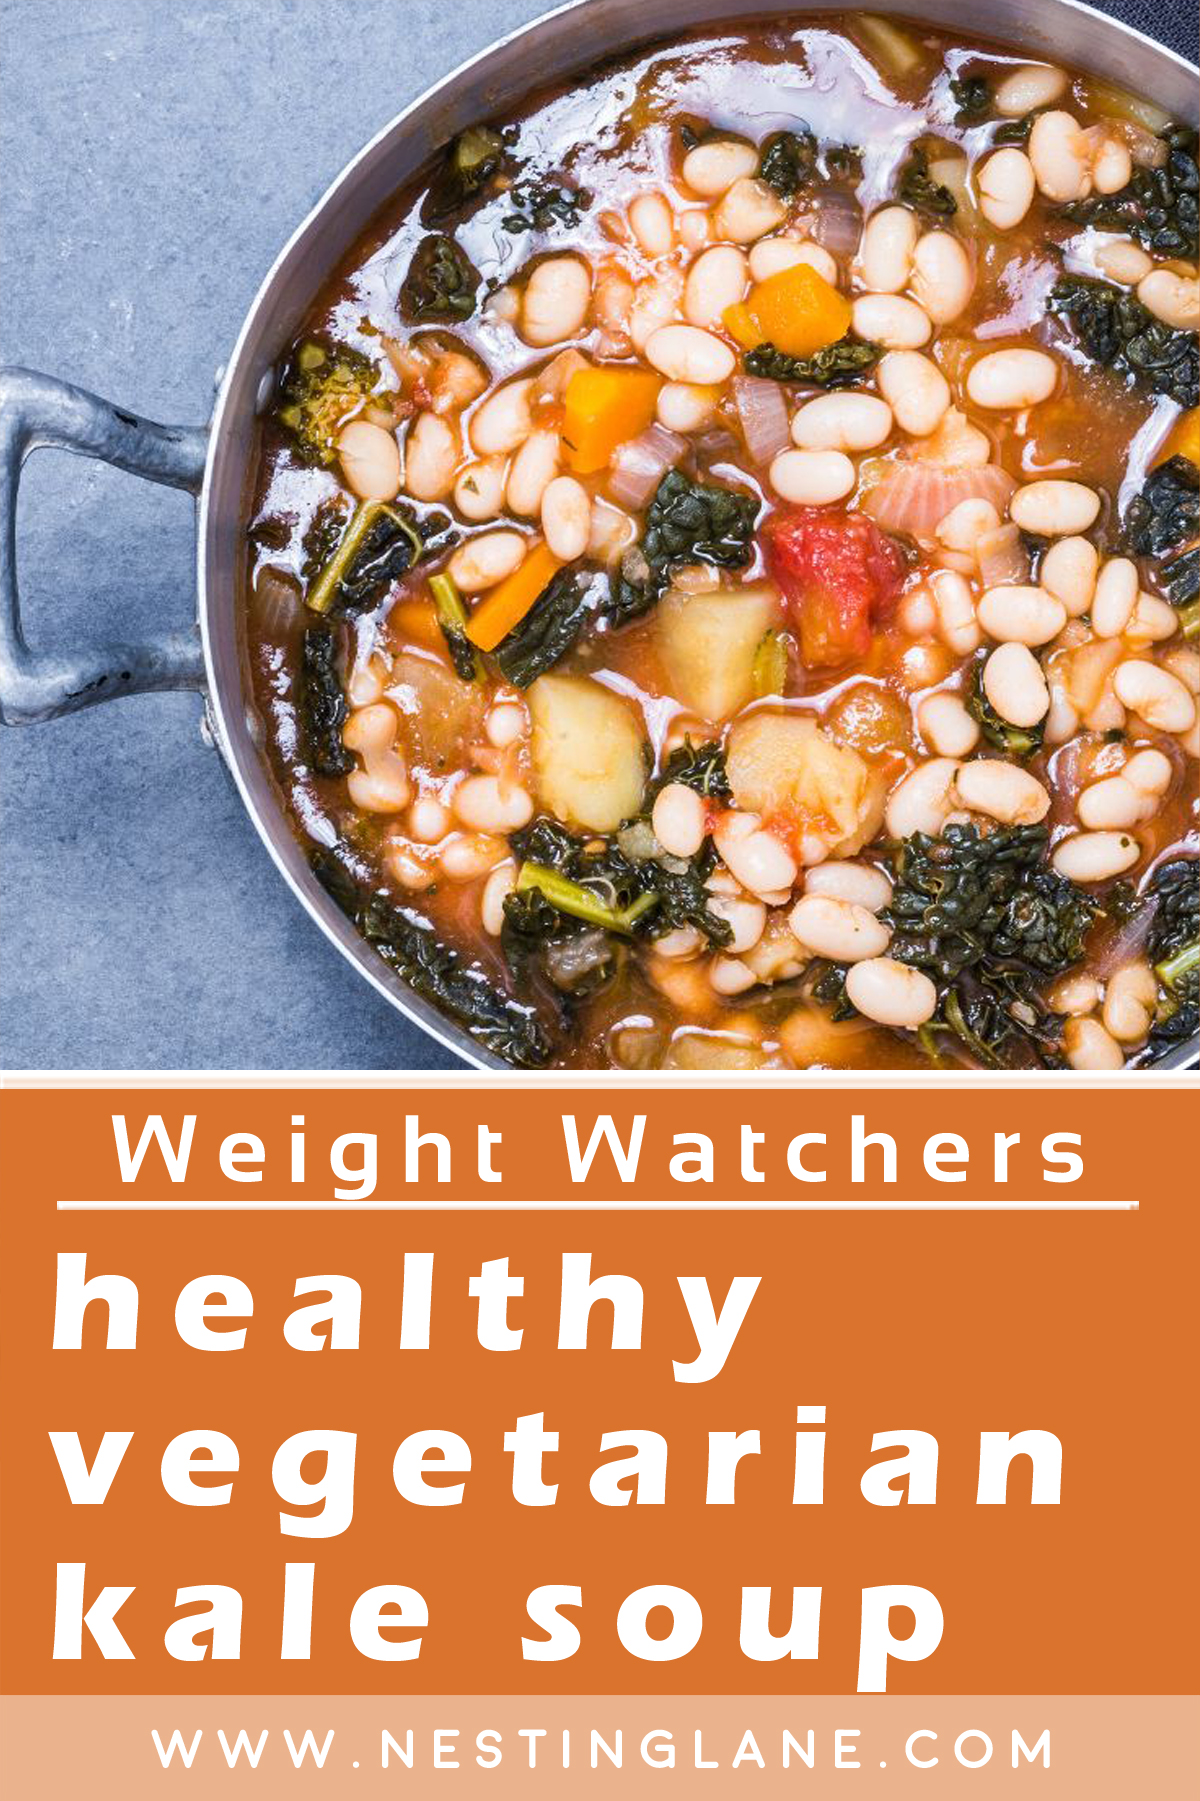 Graphic for Pinterest of Healthy Vegetarian Weight Watchers Kale Soup Recipe.